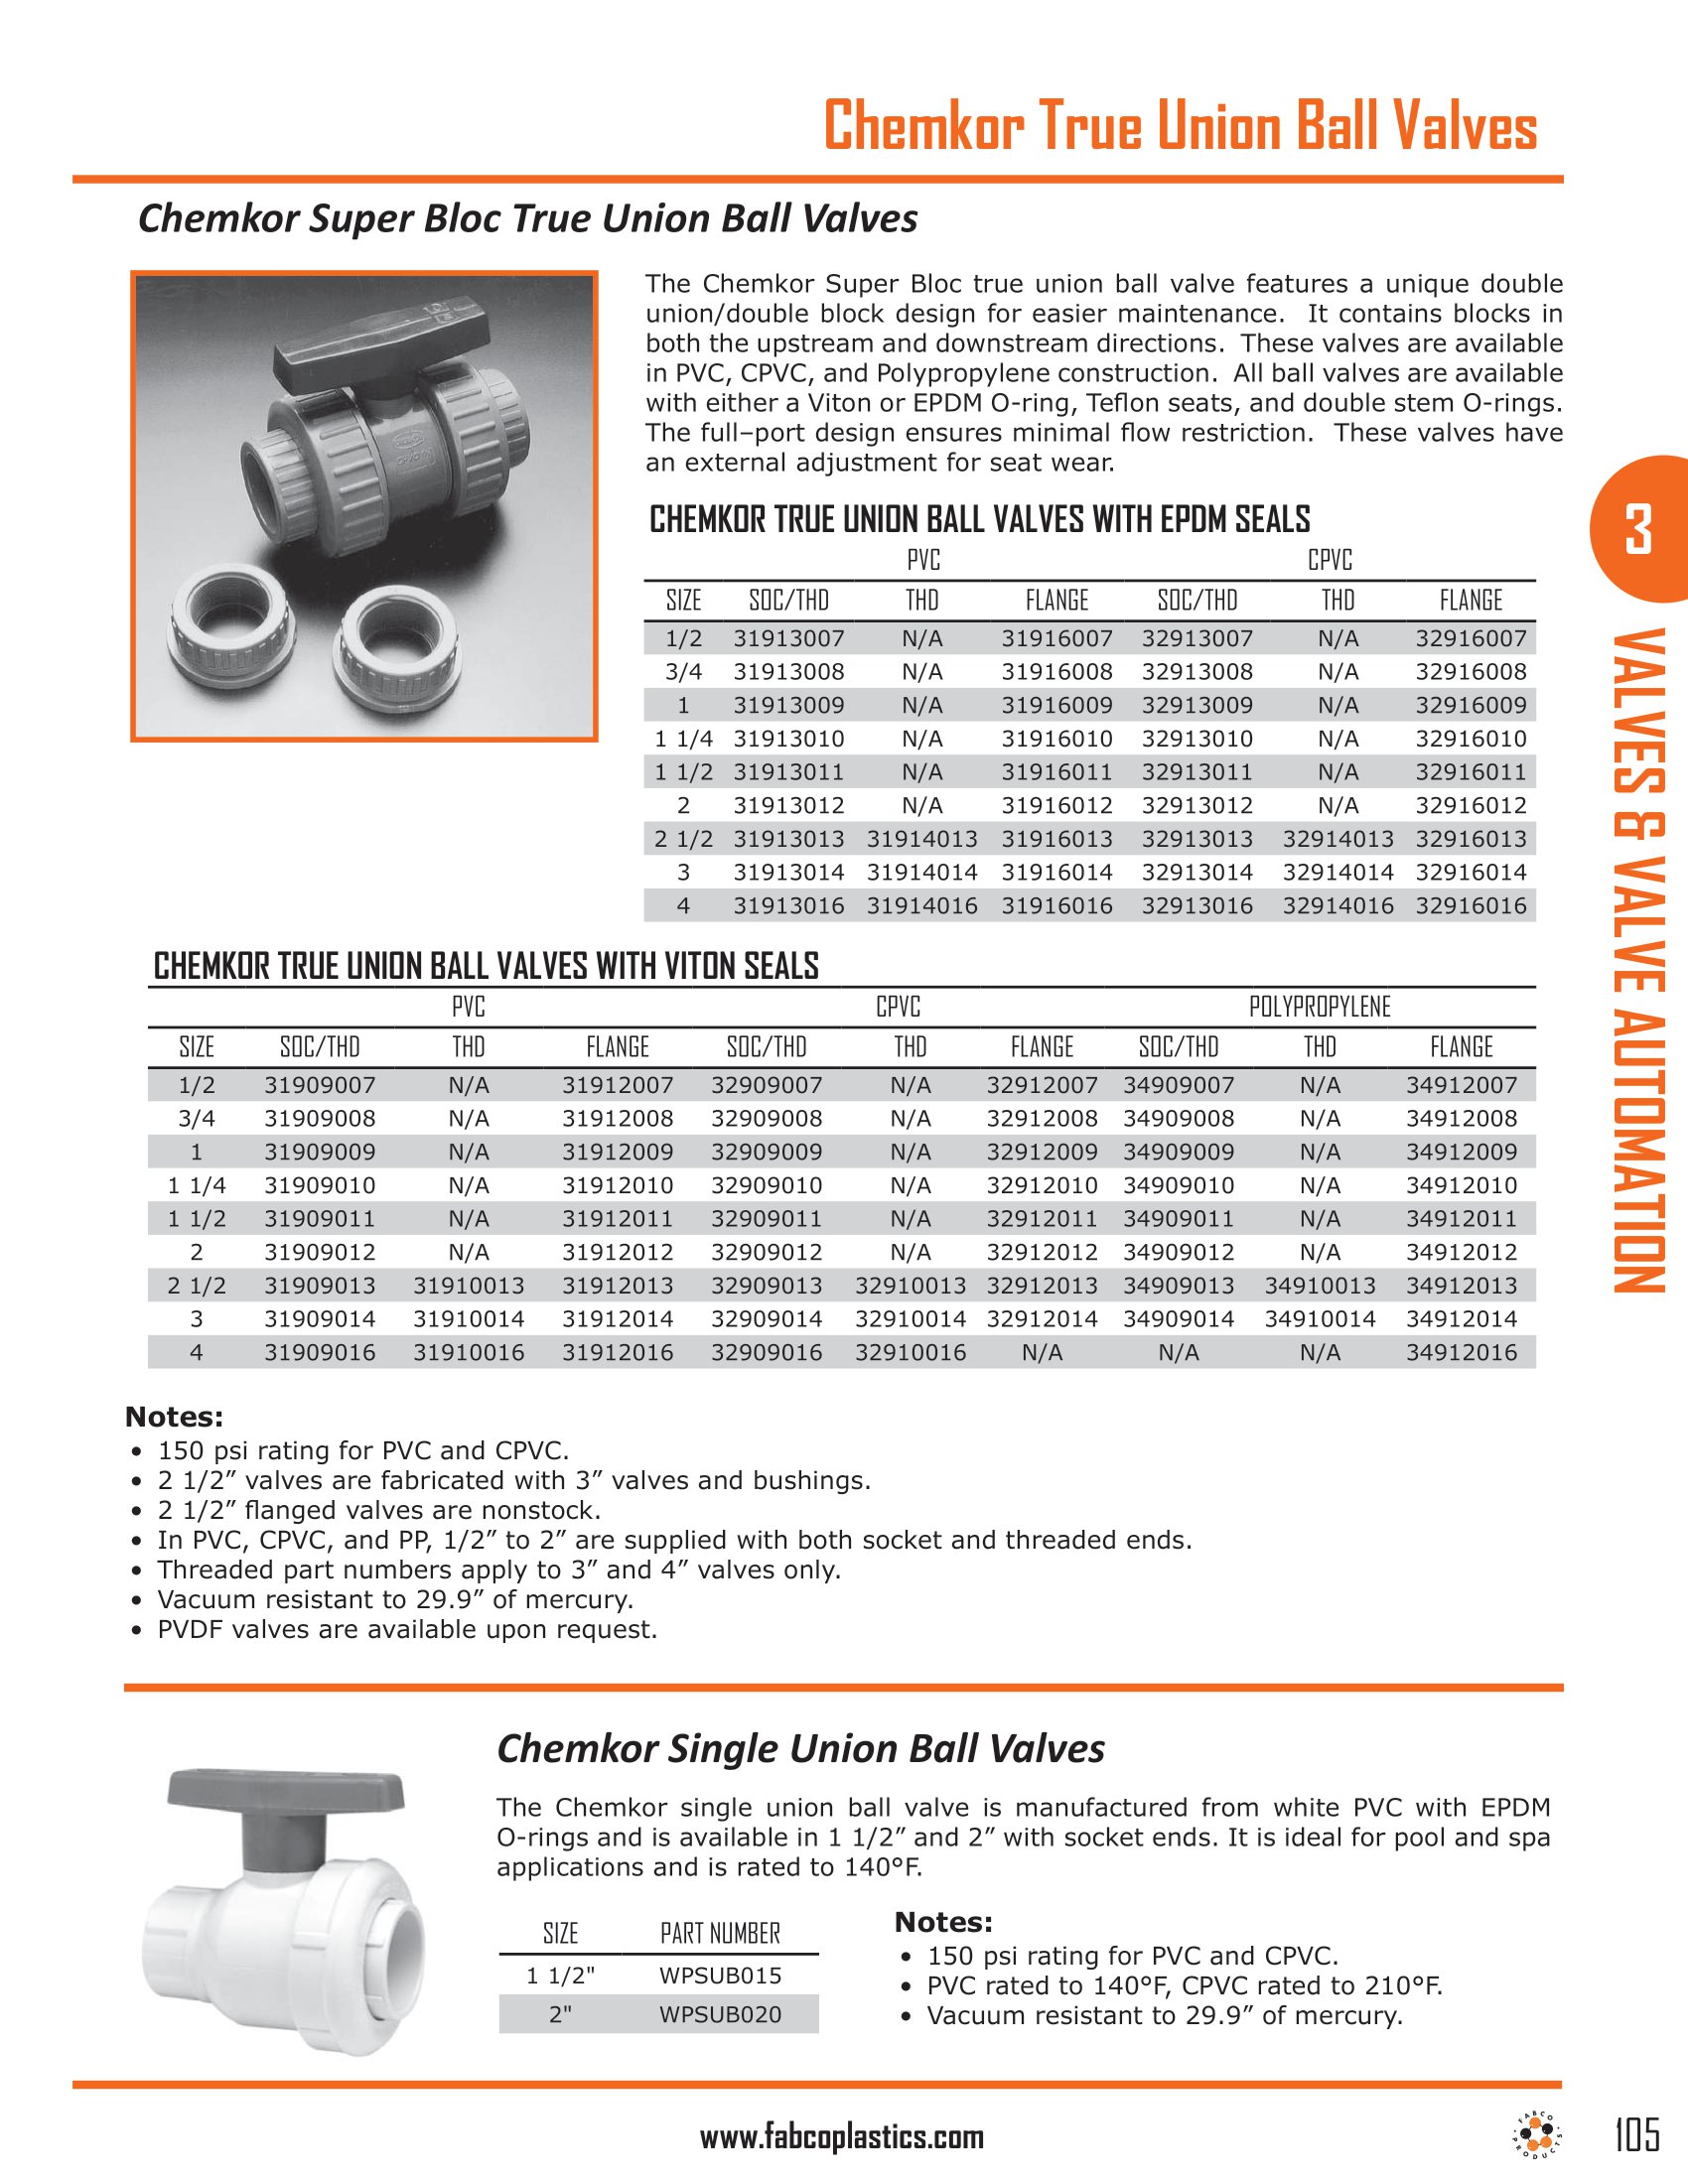 Chemkor Ball and Butterfly Valves